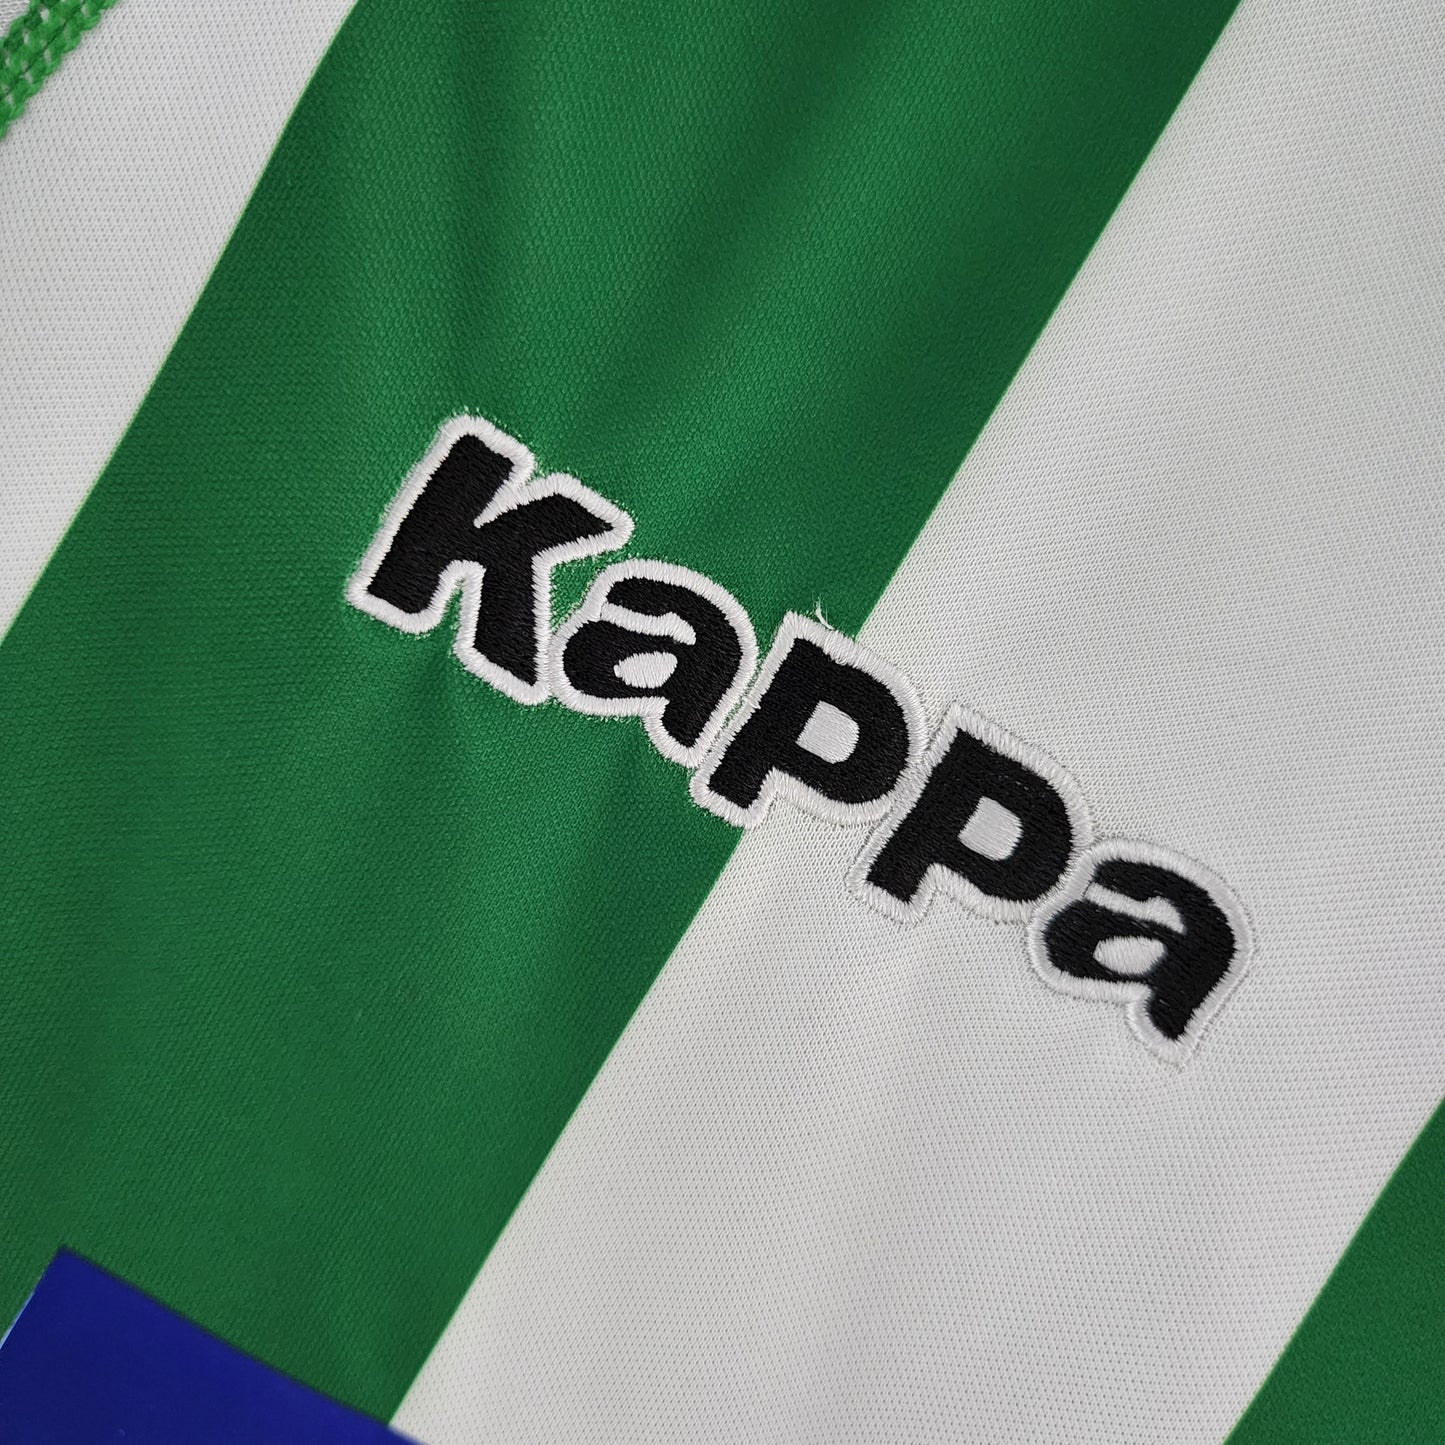 REAL BETIS 2001 - 2002 HOME JERSEY